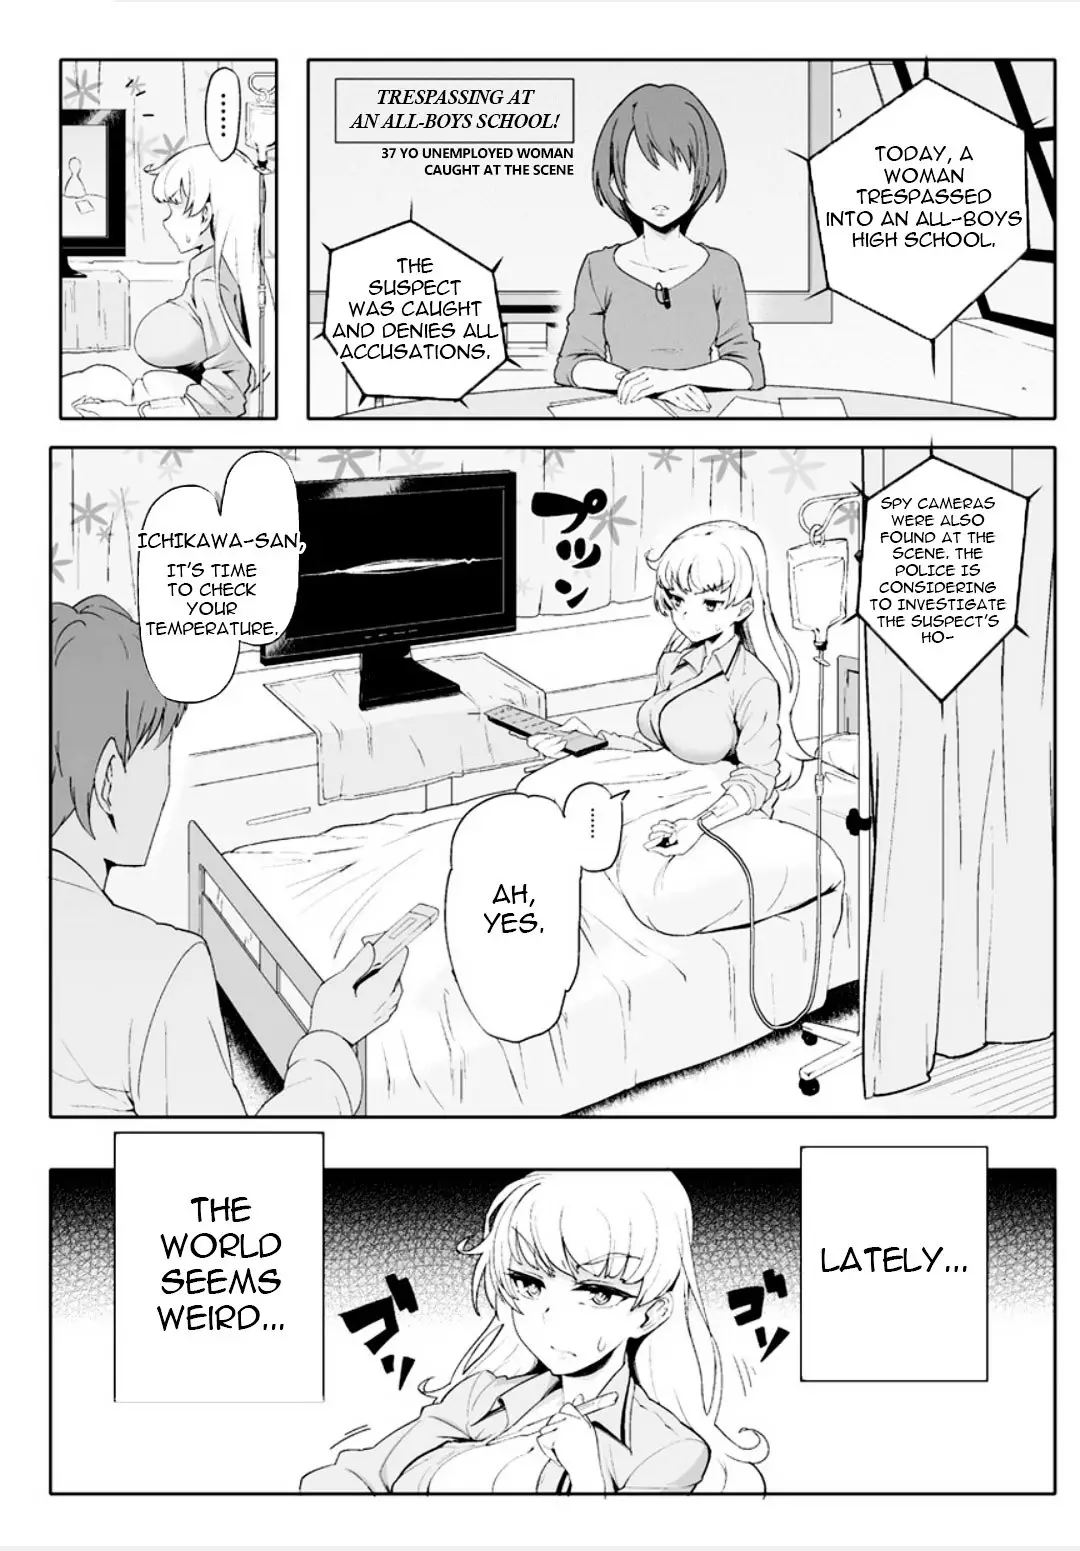 The World Of Moral Reversal - 1 page 2